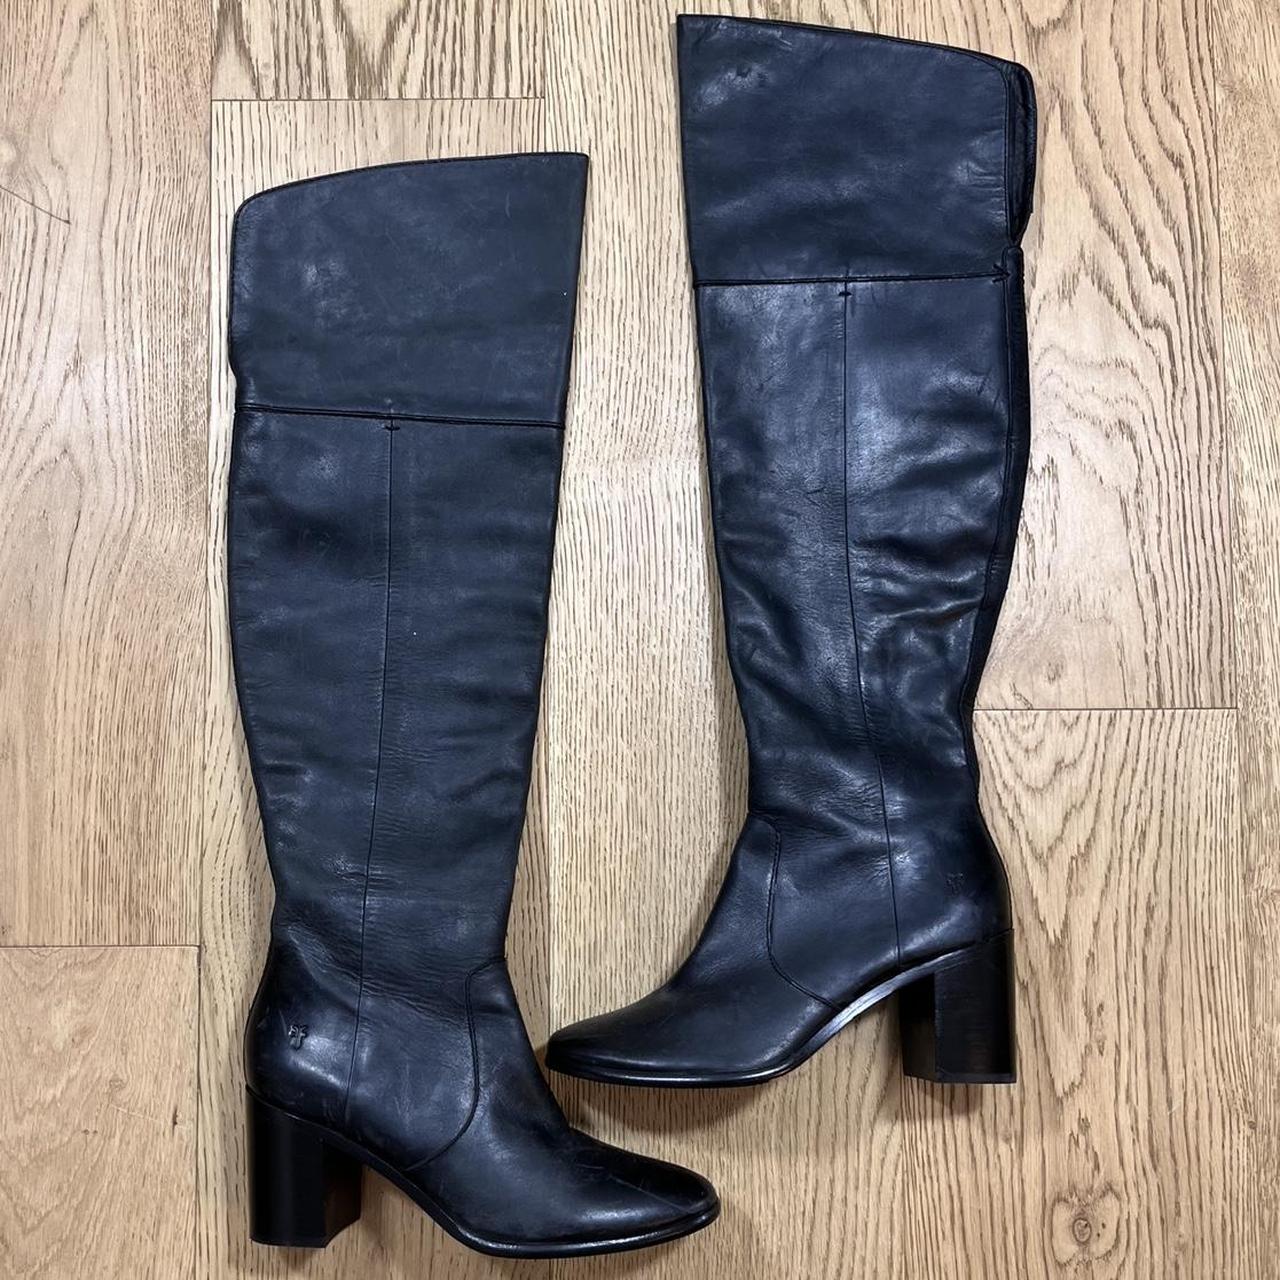 FRYE Over The Knee Leather Boots Distressed... - Depop